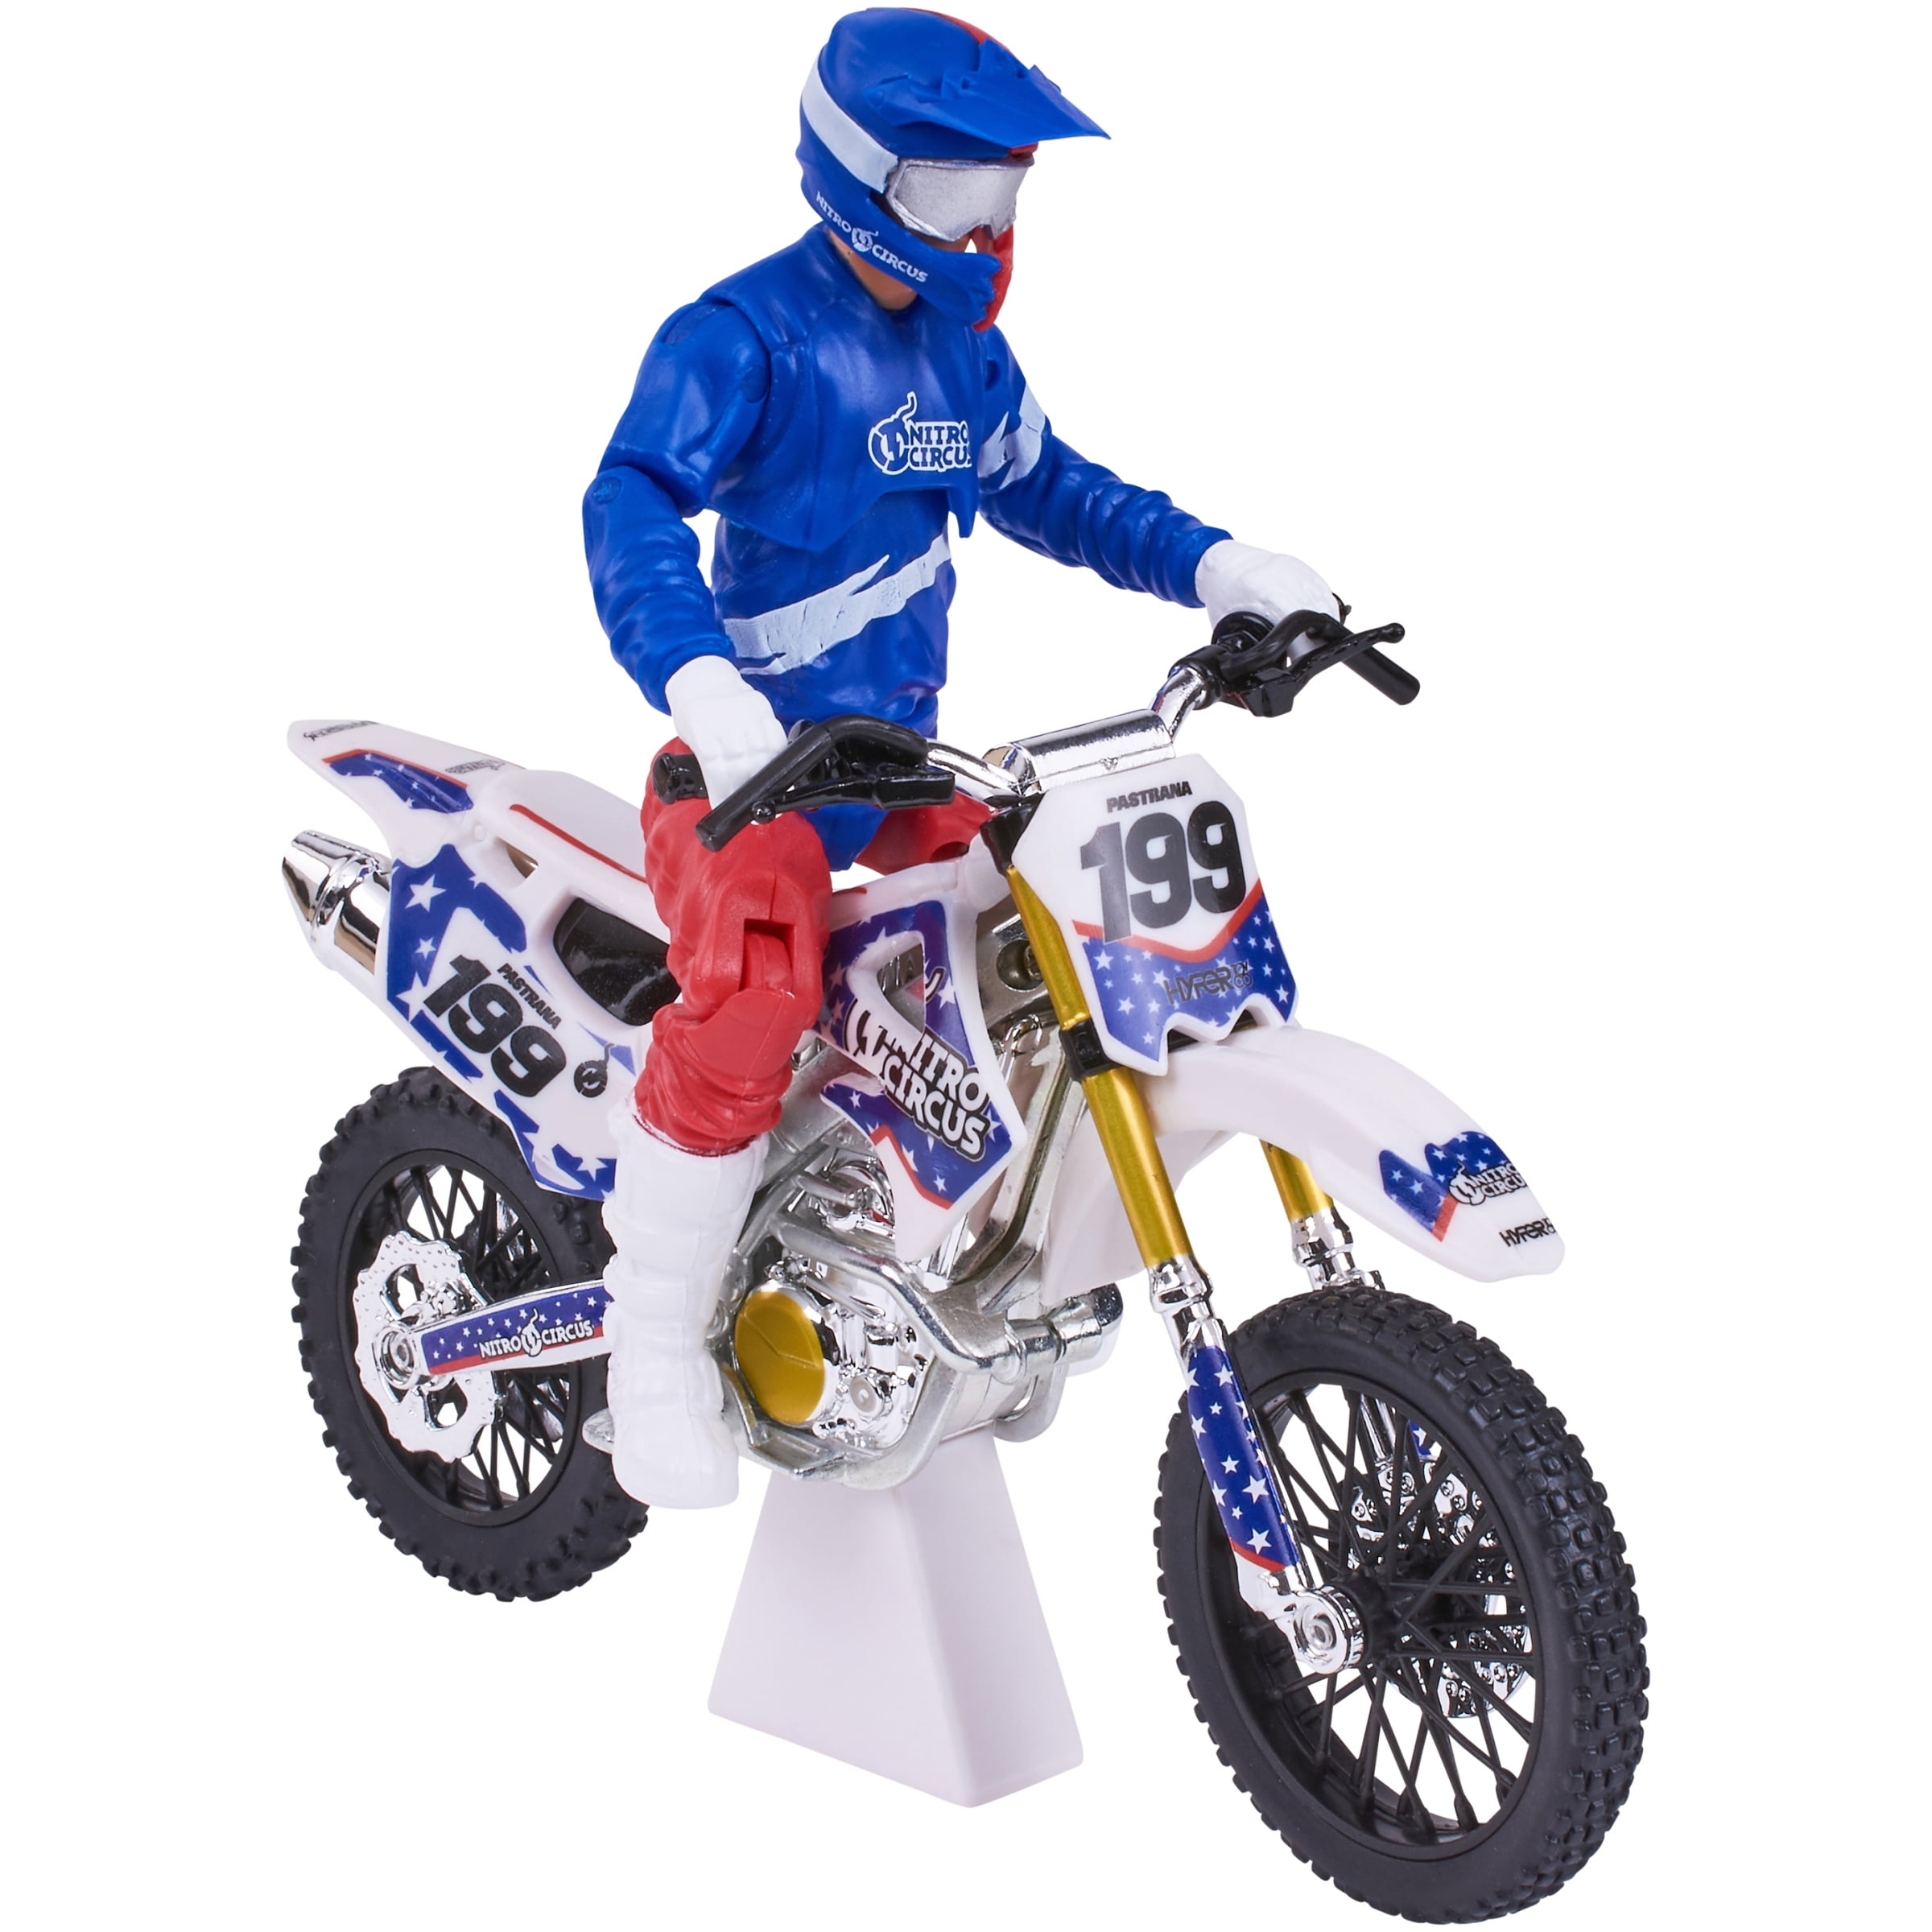 Adventure Force White Nitro Circus Dirt Bike Rider With Sound Effects